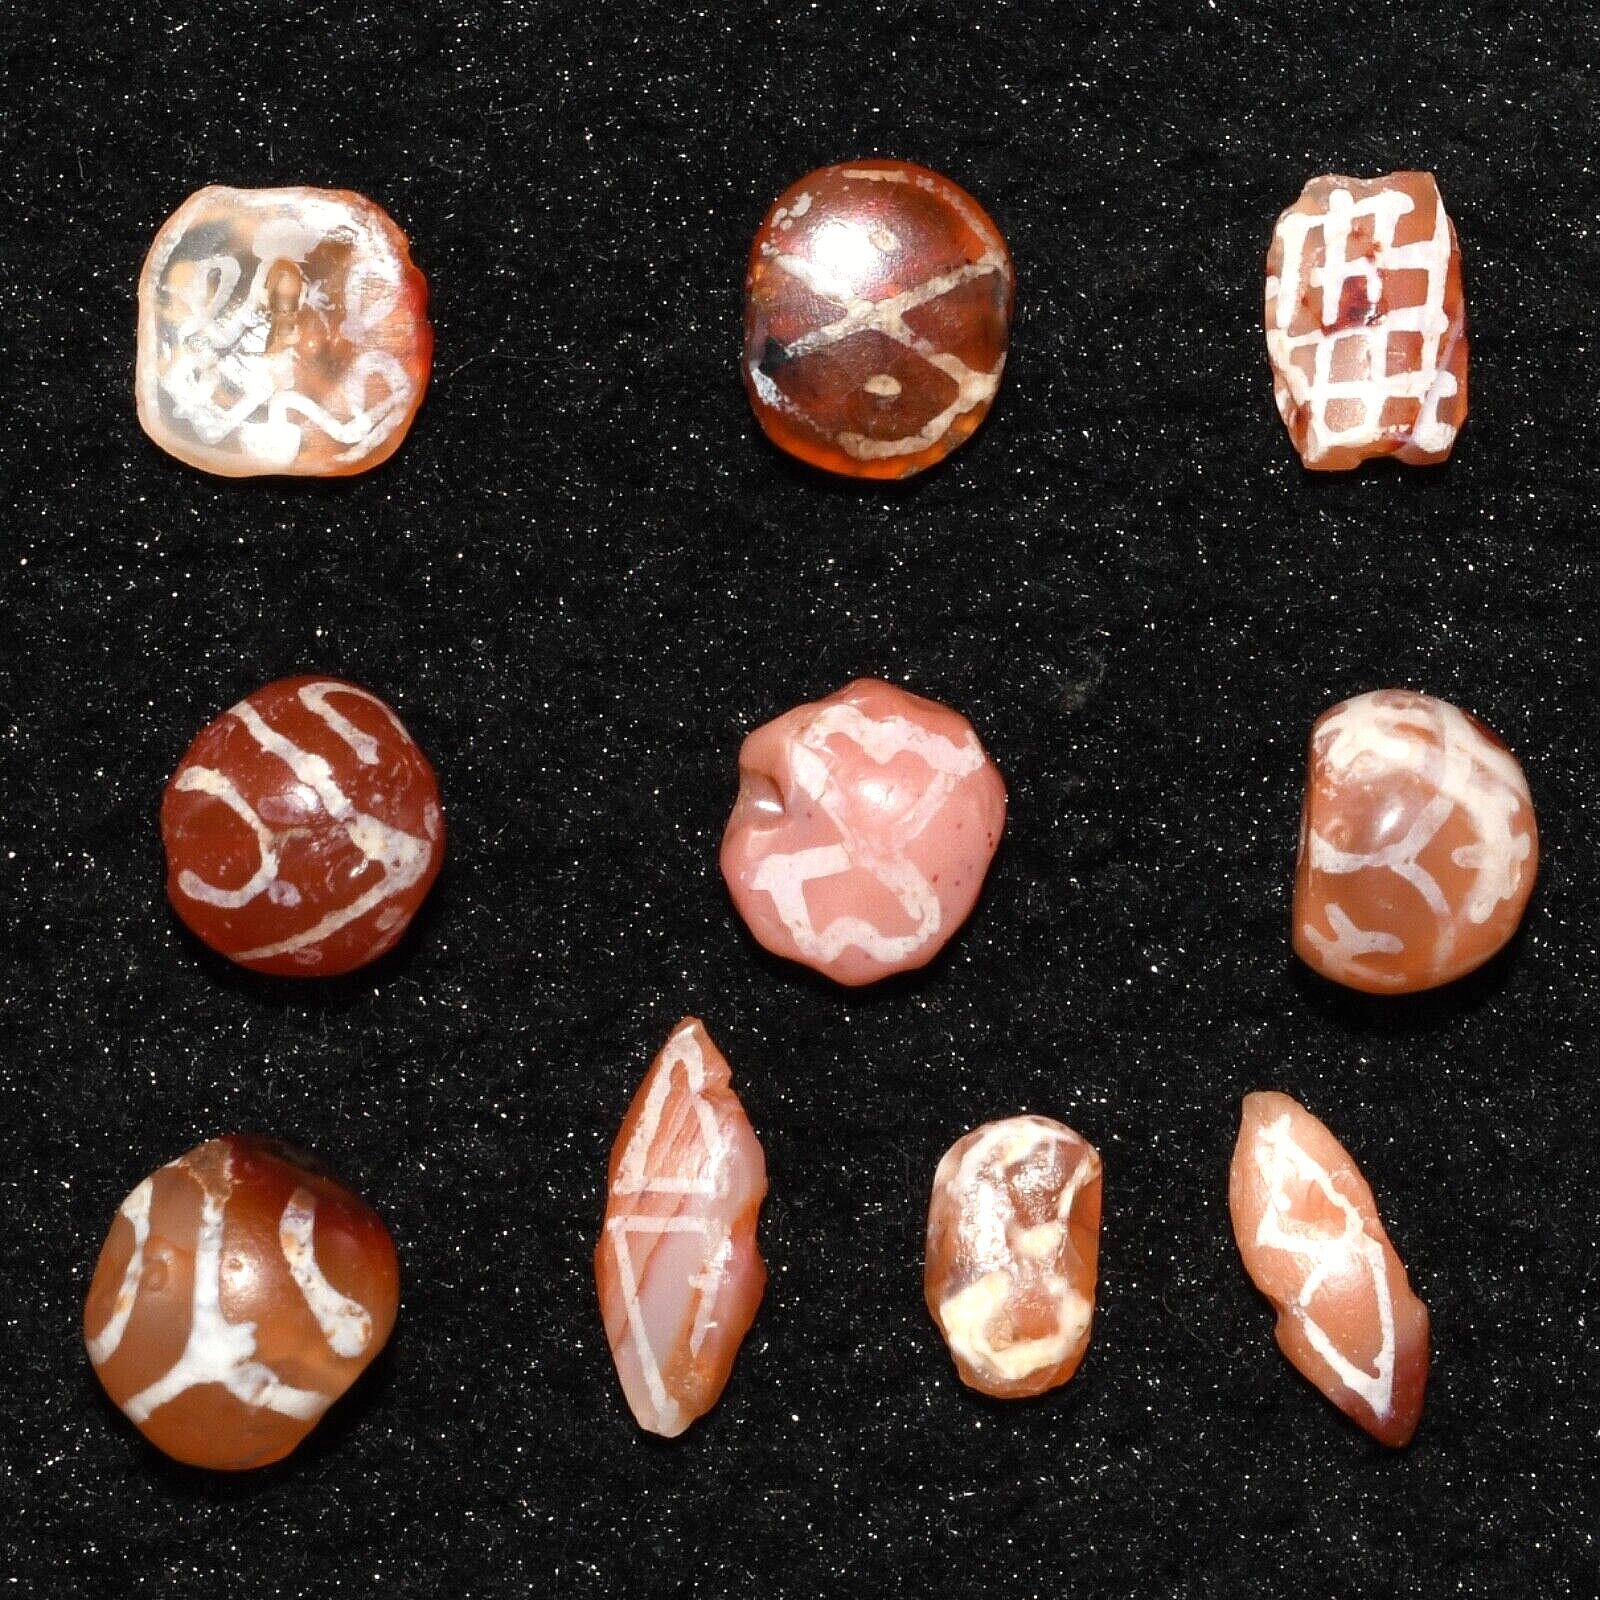 Lot Sale 10 Etched Carnelian Dzi Stone Beads with Stripes over 1500 years Old